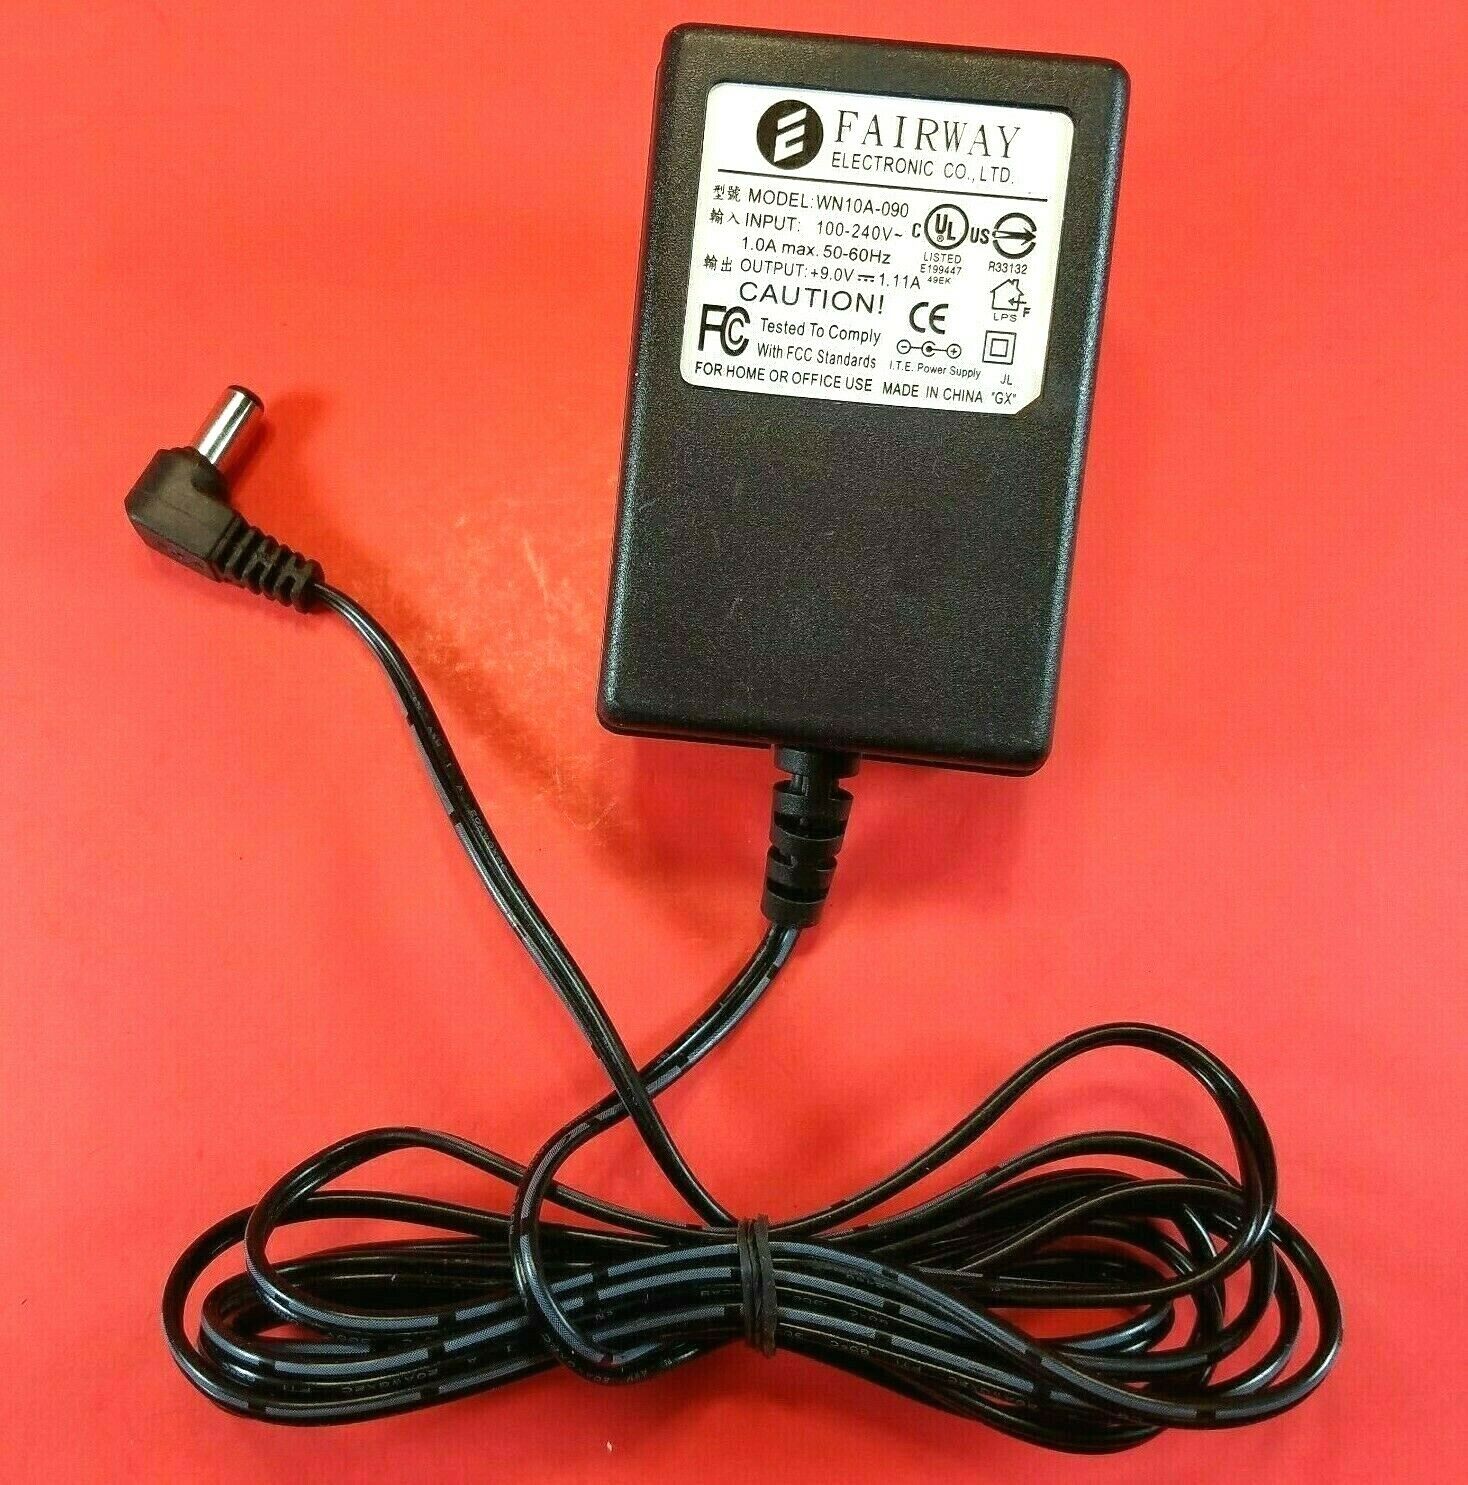 Genuine PHOPOLLO PHM1202000 Power Supply Adaptor 12V - 2000mA OEM AC/DC Adapter Type: AC/DC Adapter Output Voltage: 1